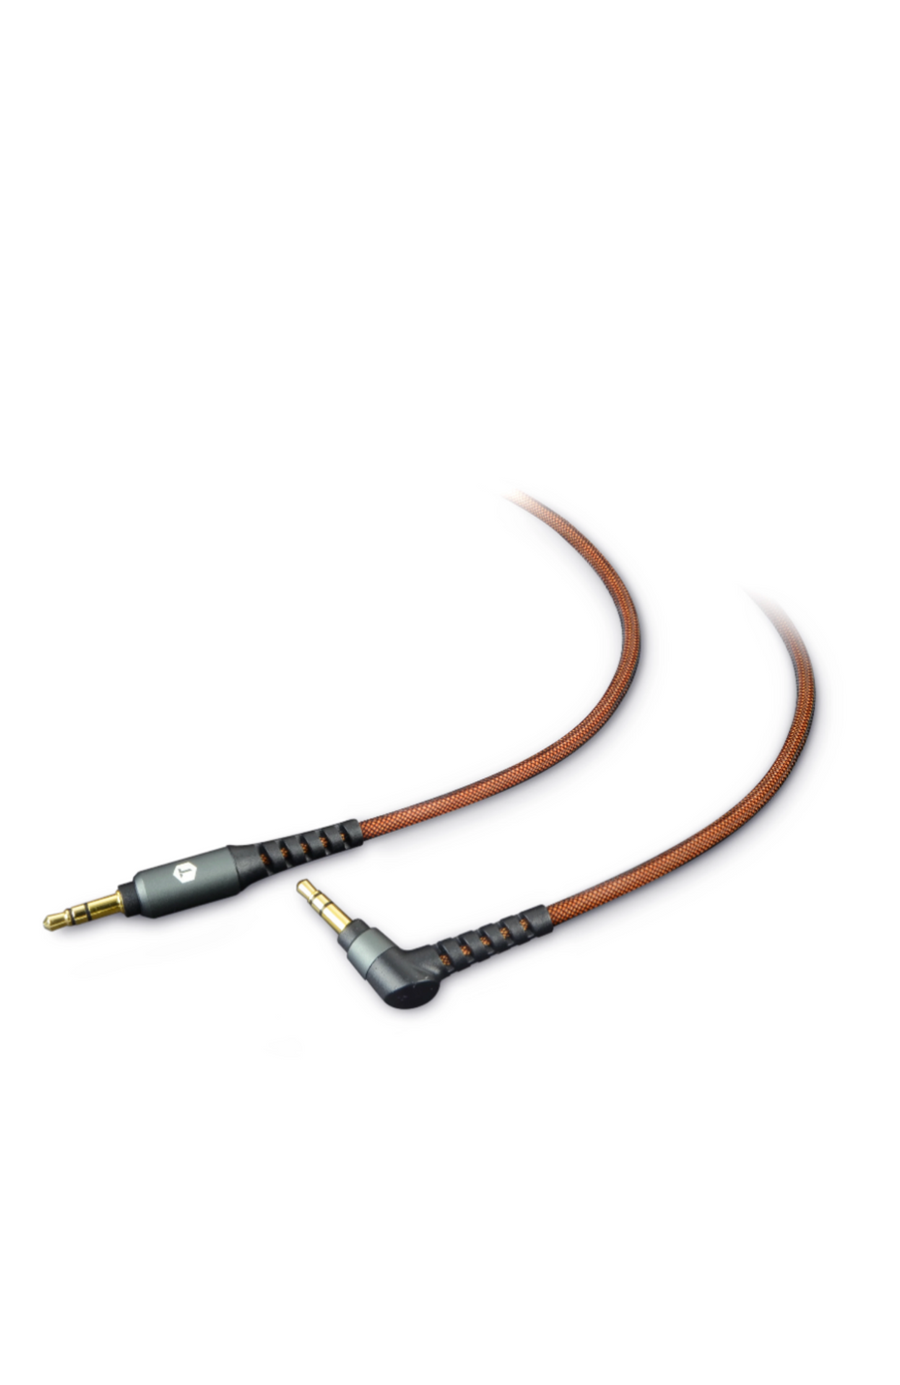 8 Ft. PRO Armor Weave Cable With Slim Tip with 3.5mm Aux Connector